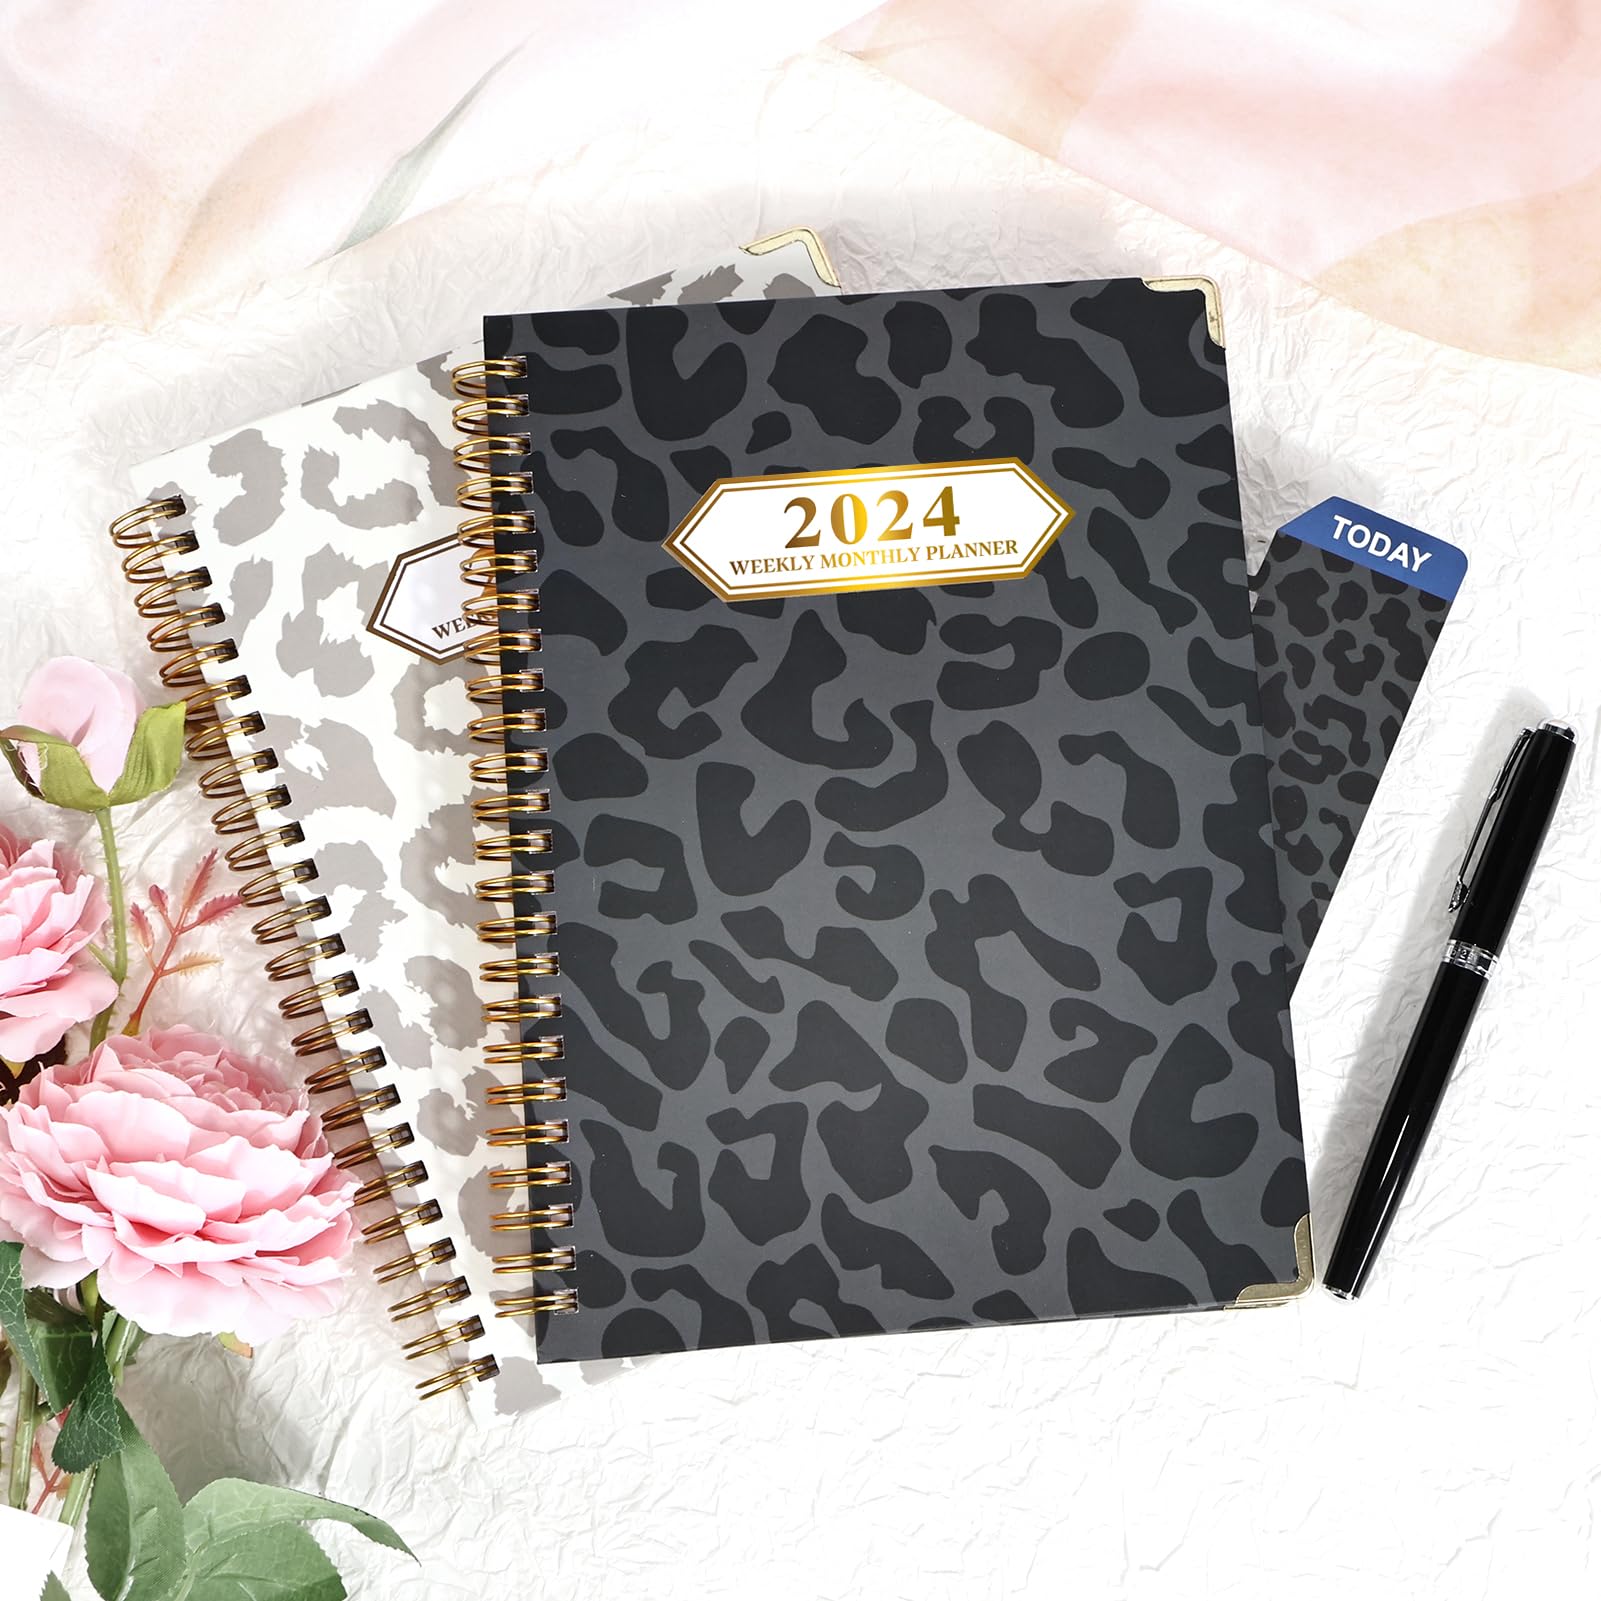 Knagsfa 2024 Monthly Planner, Jan 2024 - Dec 2024 Weekly Monthly Planner 6.5" x 8.5" with Page Tabs, Calendar Hardcover with Inner Pocket, Elastic Band, Twin-Wire Binding, Bookmark,Black Leopard